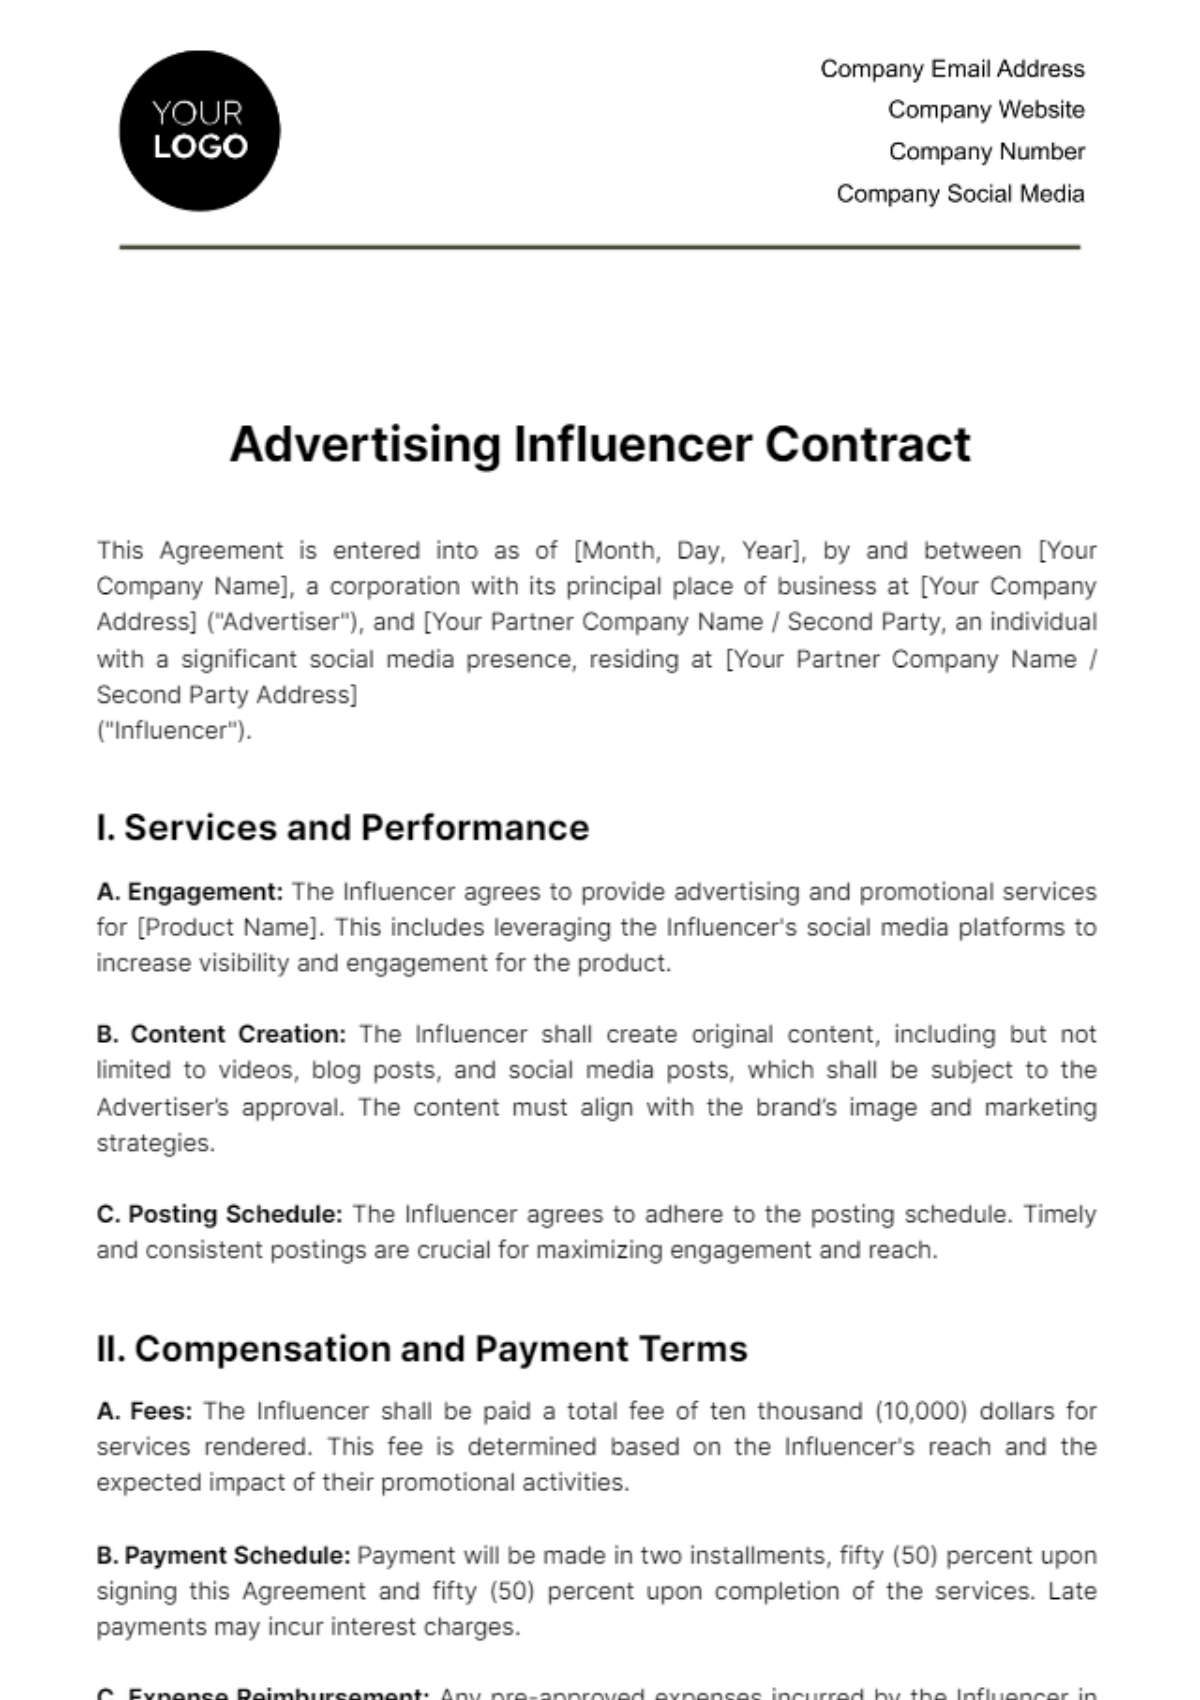 Free Advertising Influencer Contract Template